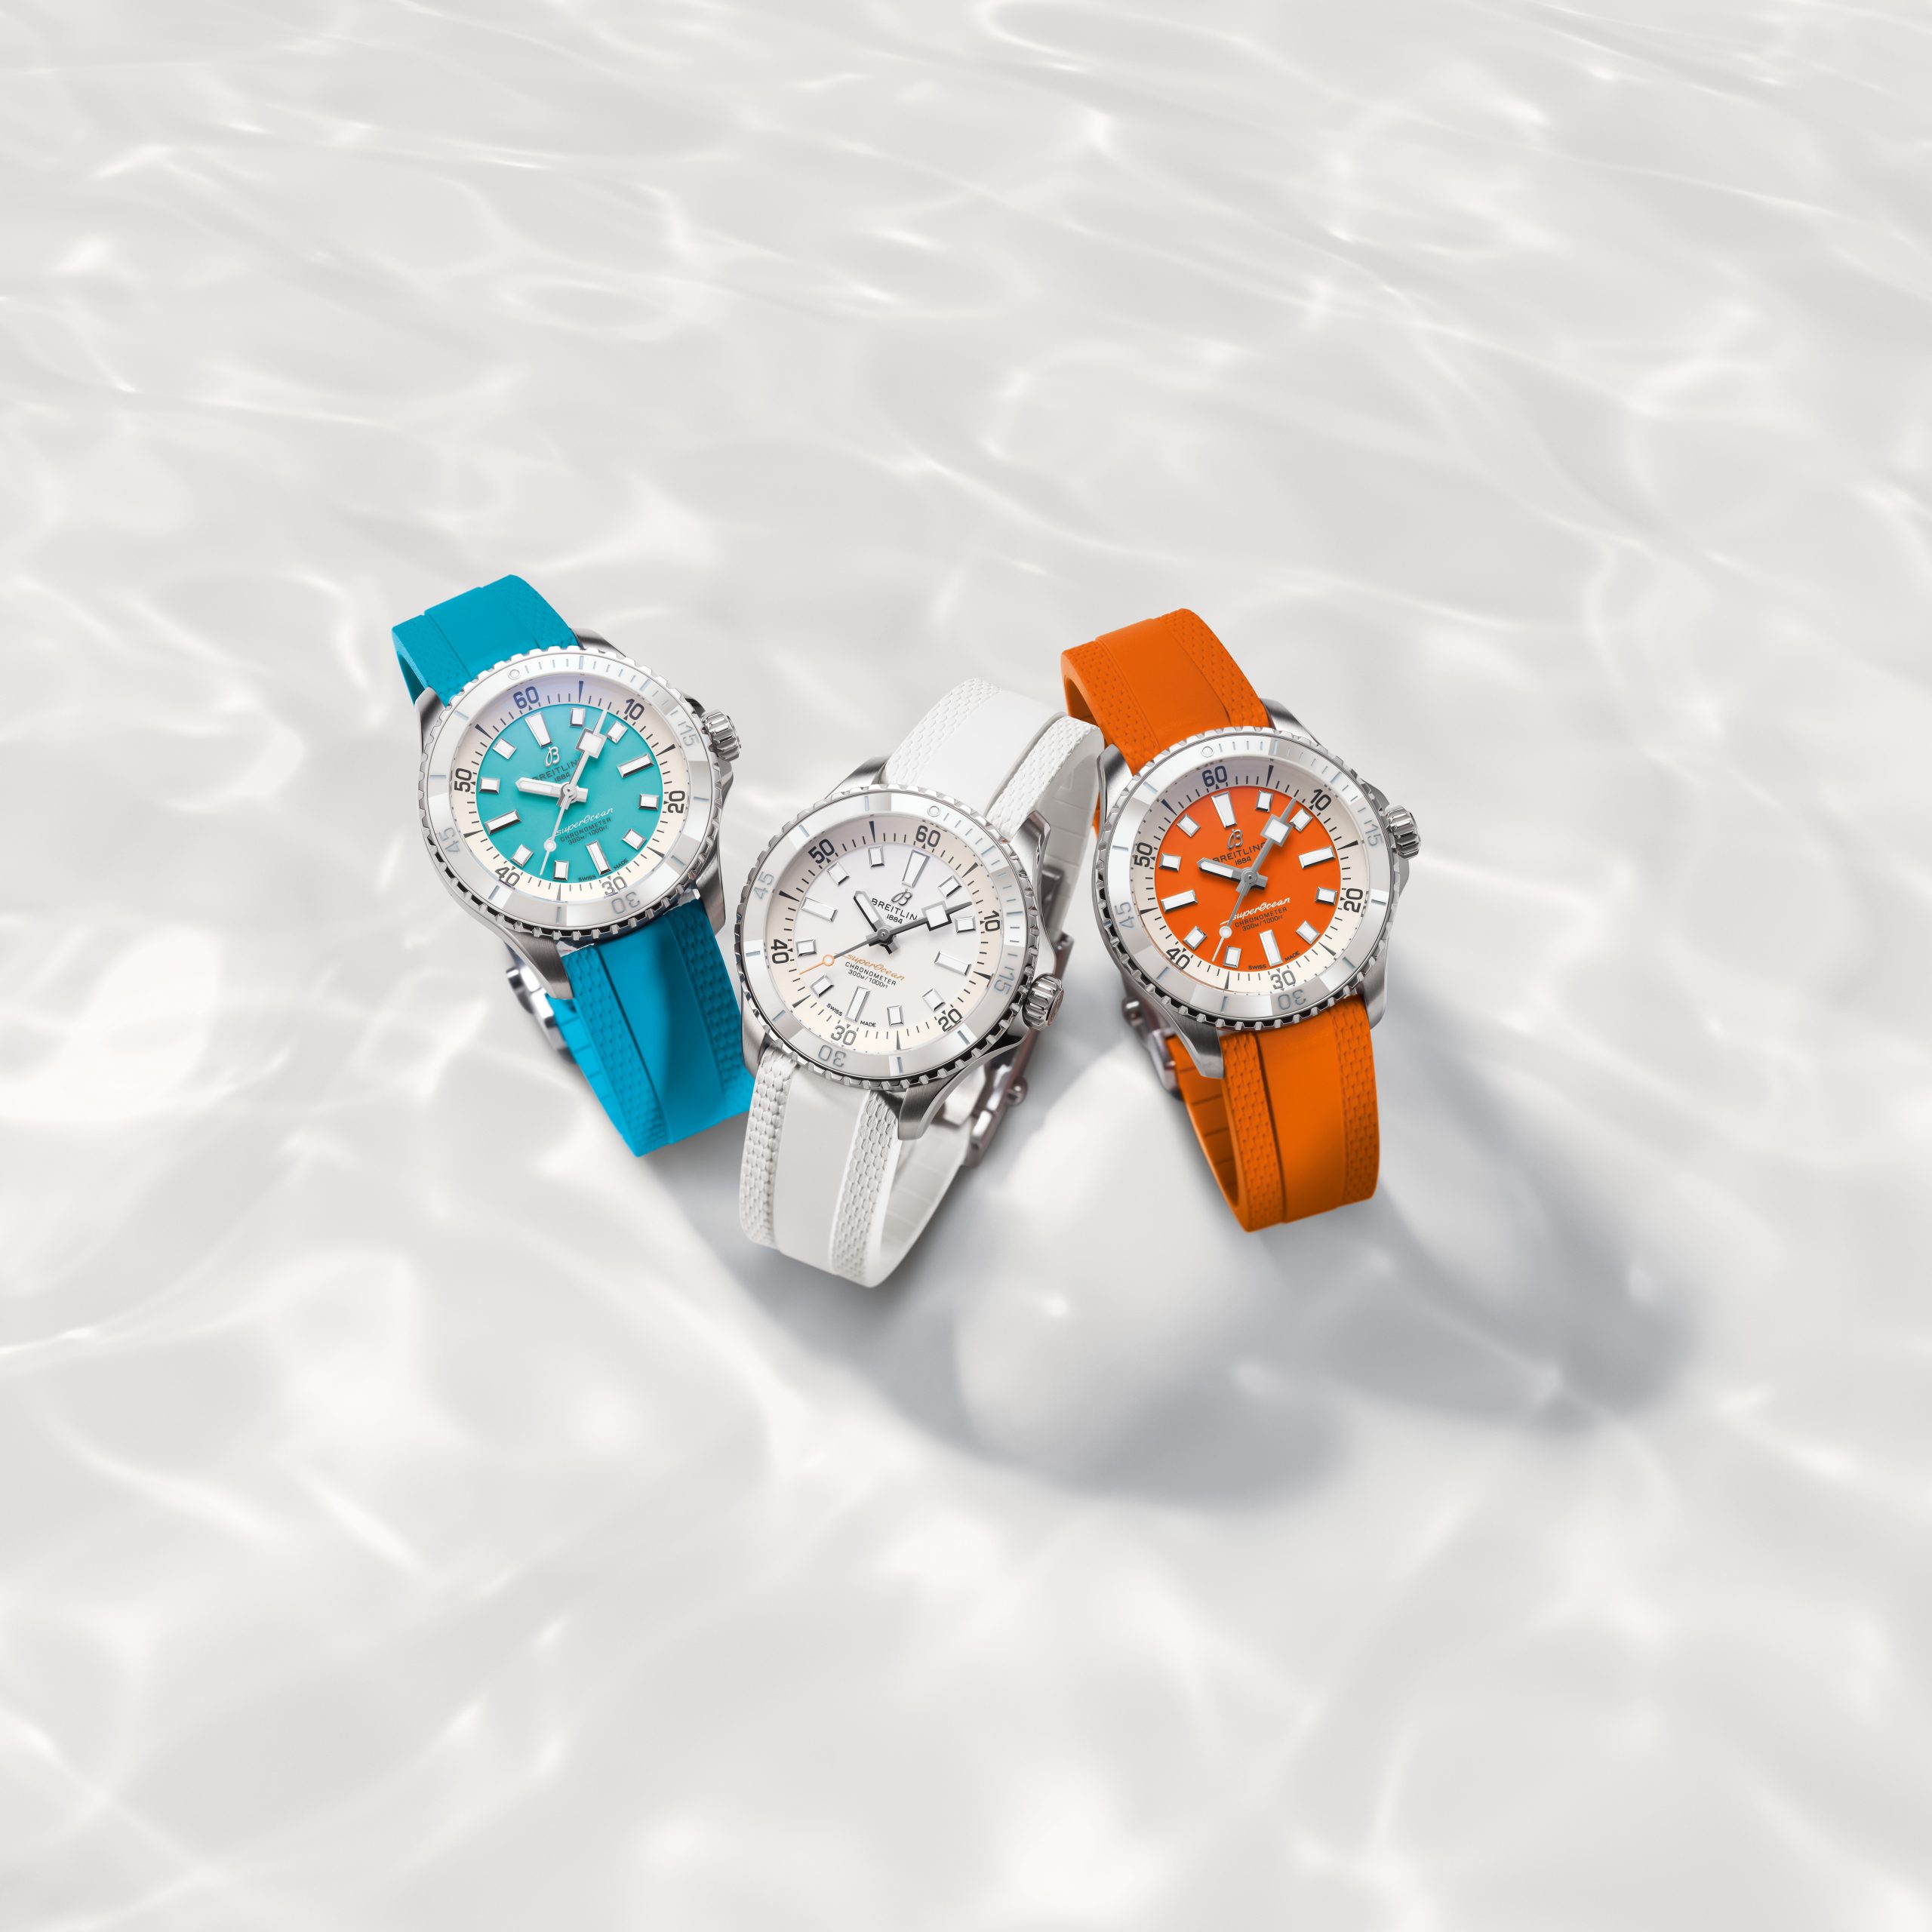 The Breitling Superocean Combines Fun With Zesty Colours